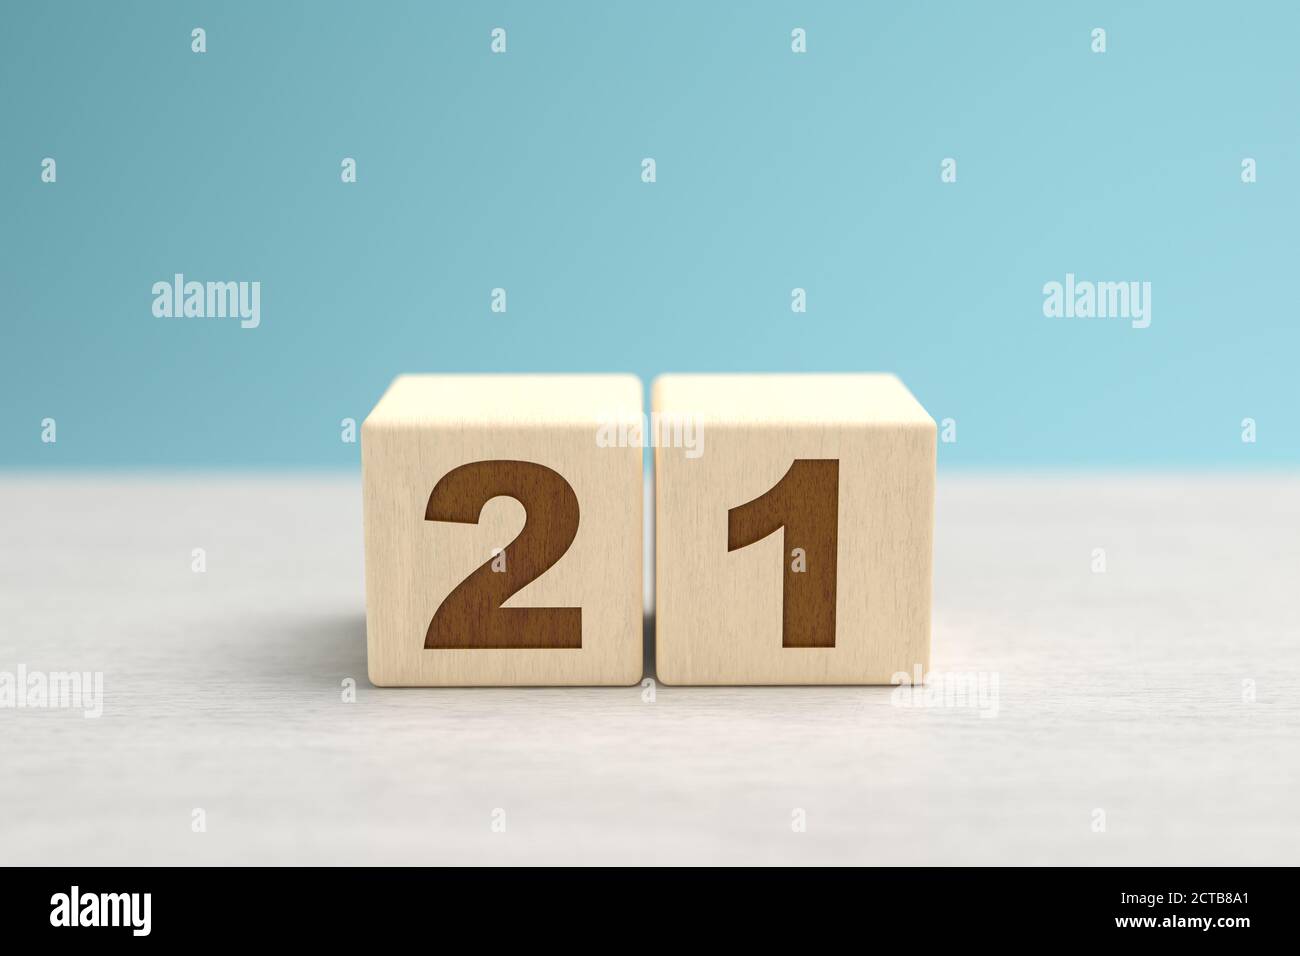 Wooden toy blocks forming the number 21. Stock Photo